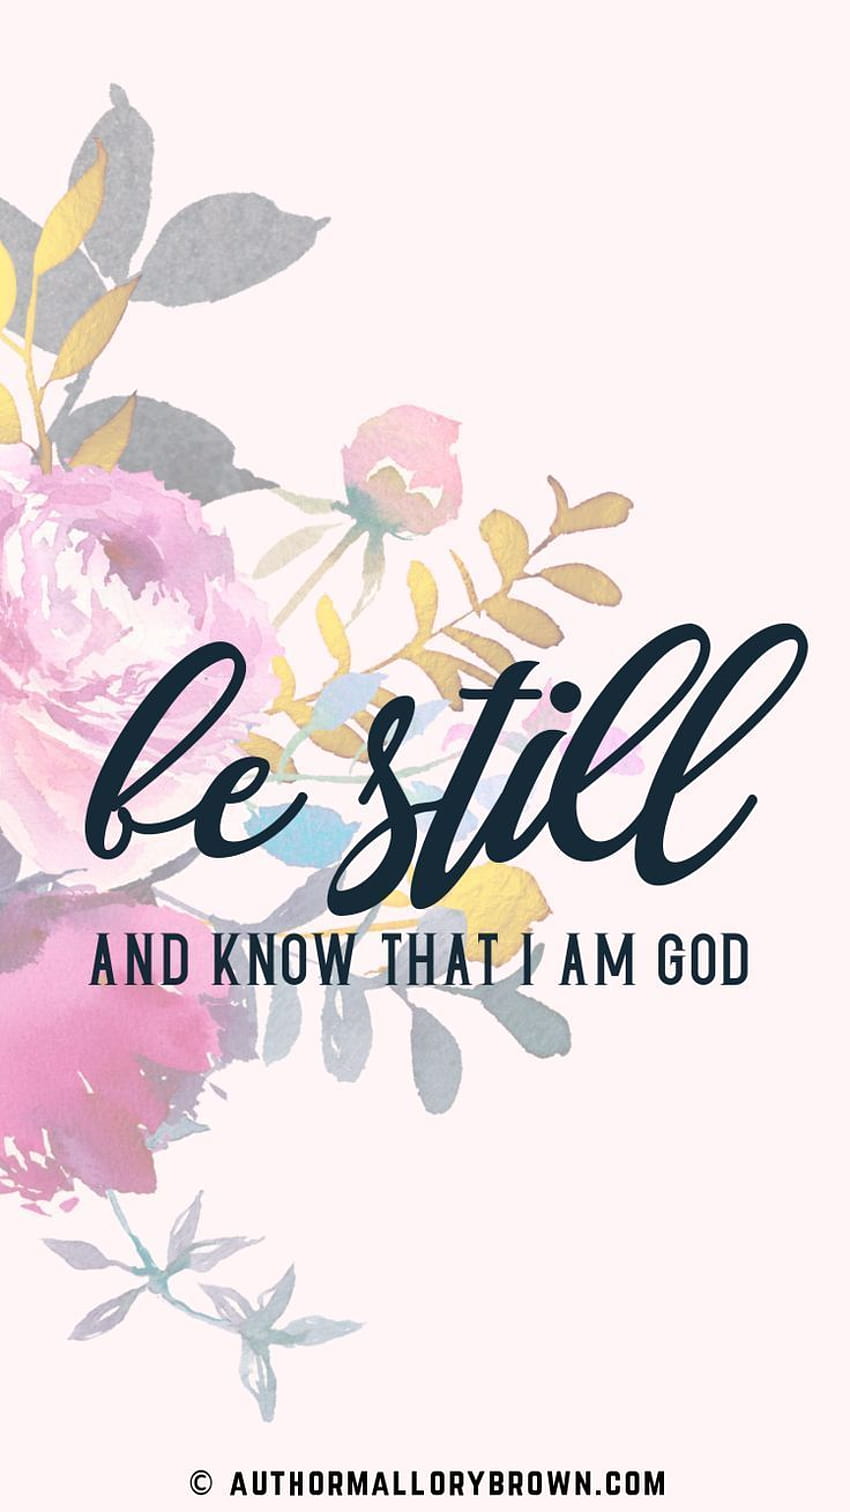 Be still and know that I am God' Psalm 46:10. iPhone featuring You Wash I'll Dry cover art…, spring bible verse HD phone wallpaper